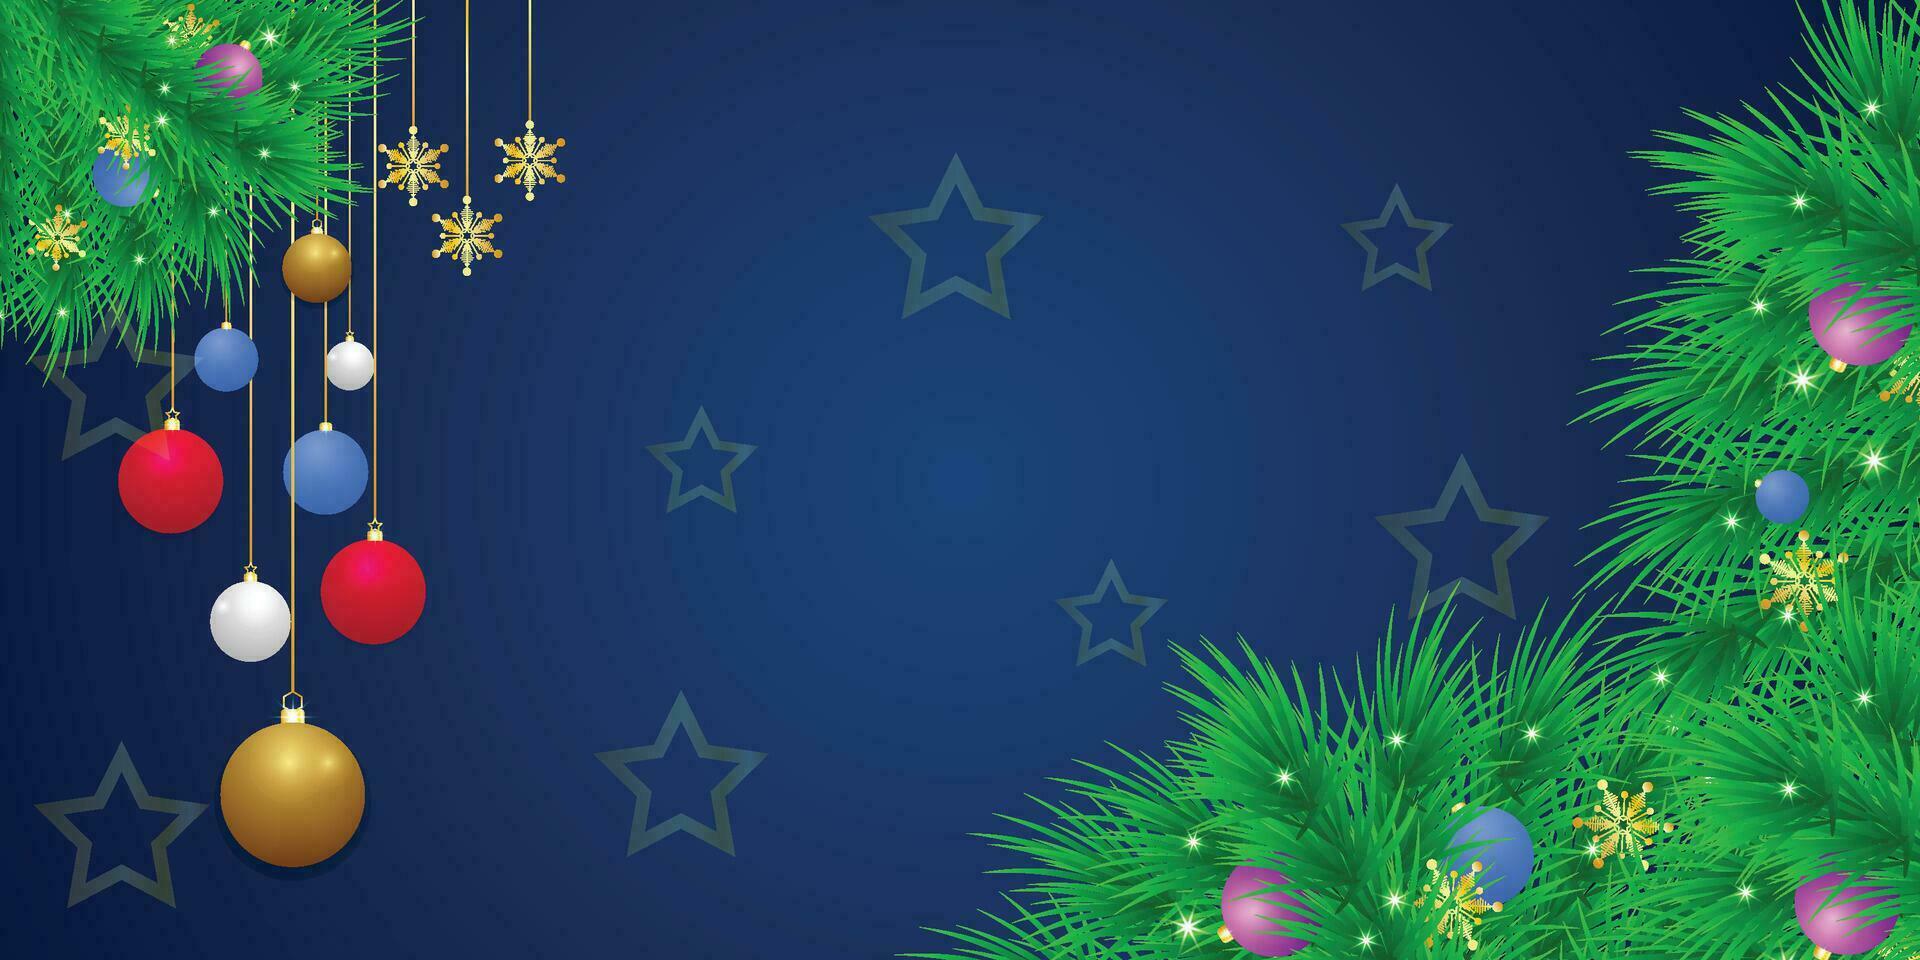 Realistic Christmas green leaf banner with red and white balls with lights and snowflakes with blue background. vector